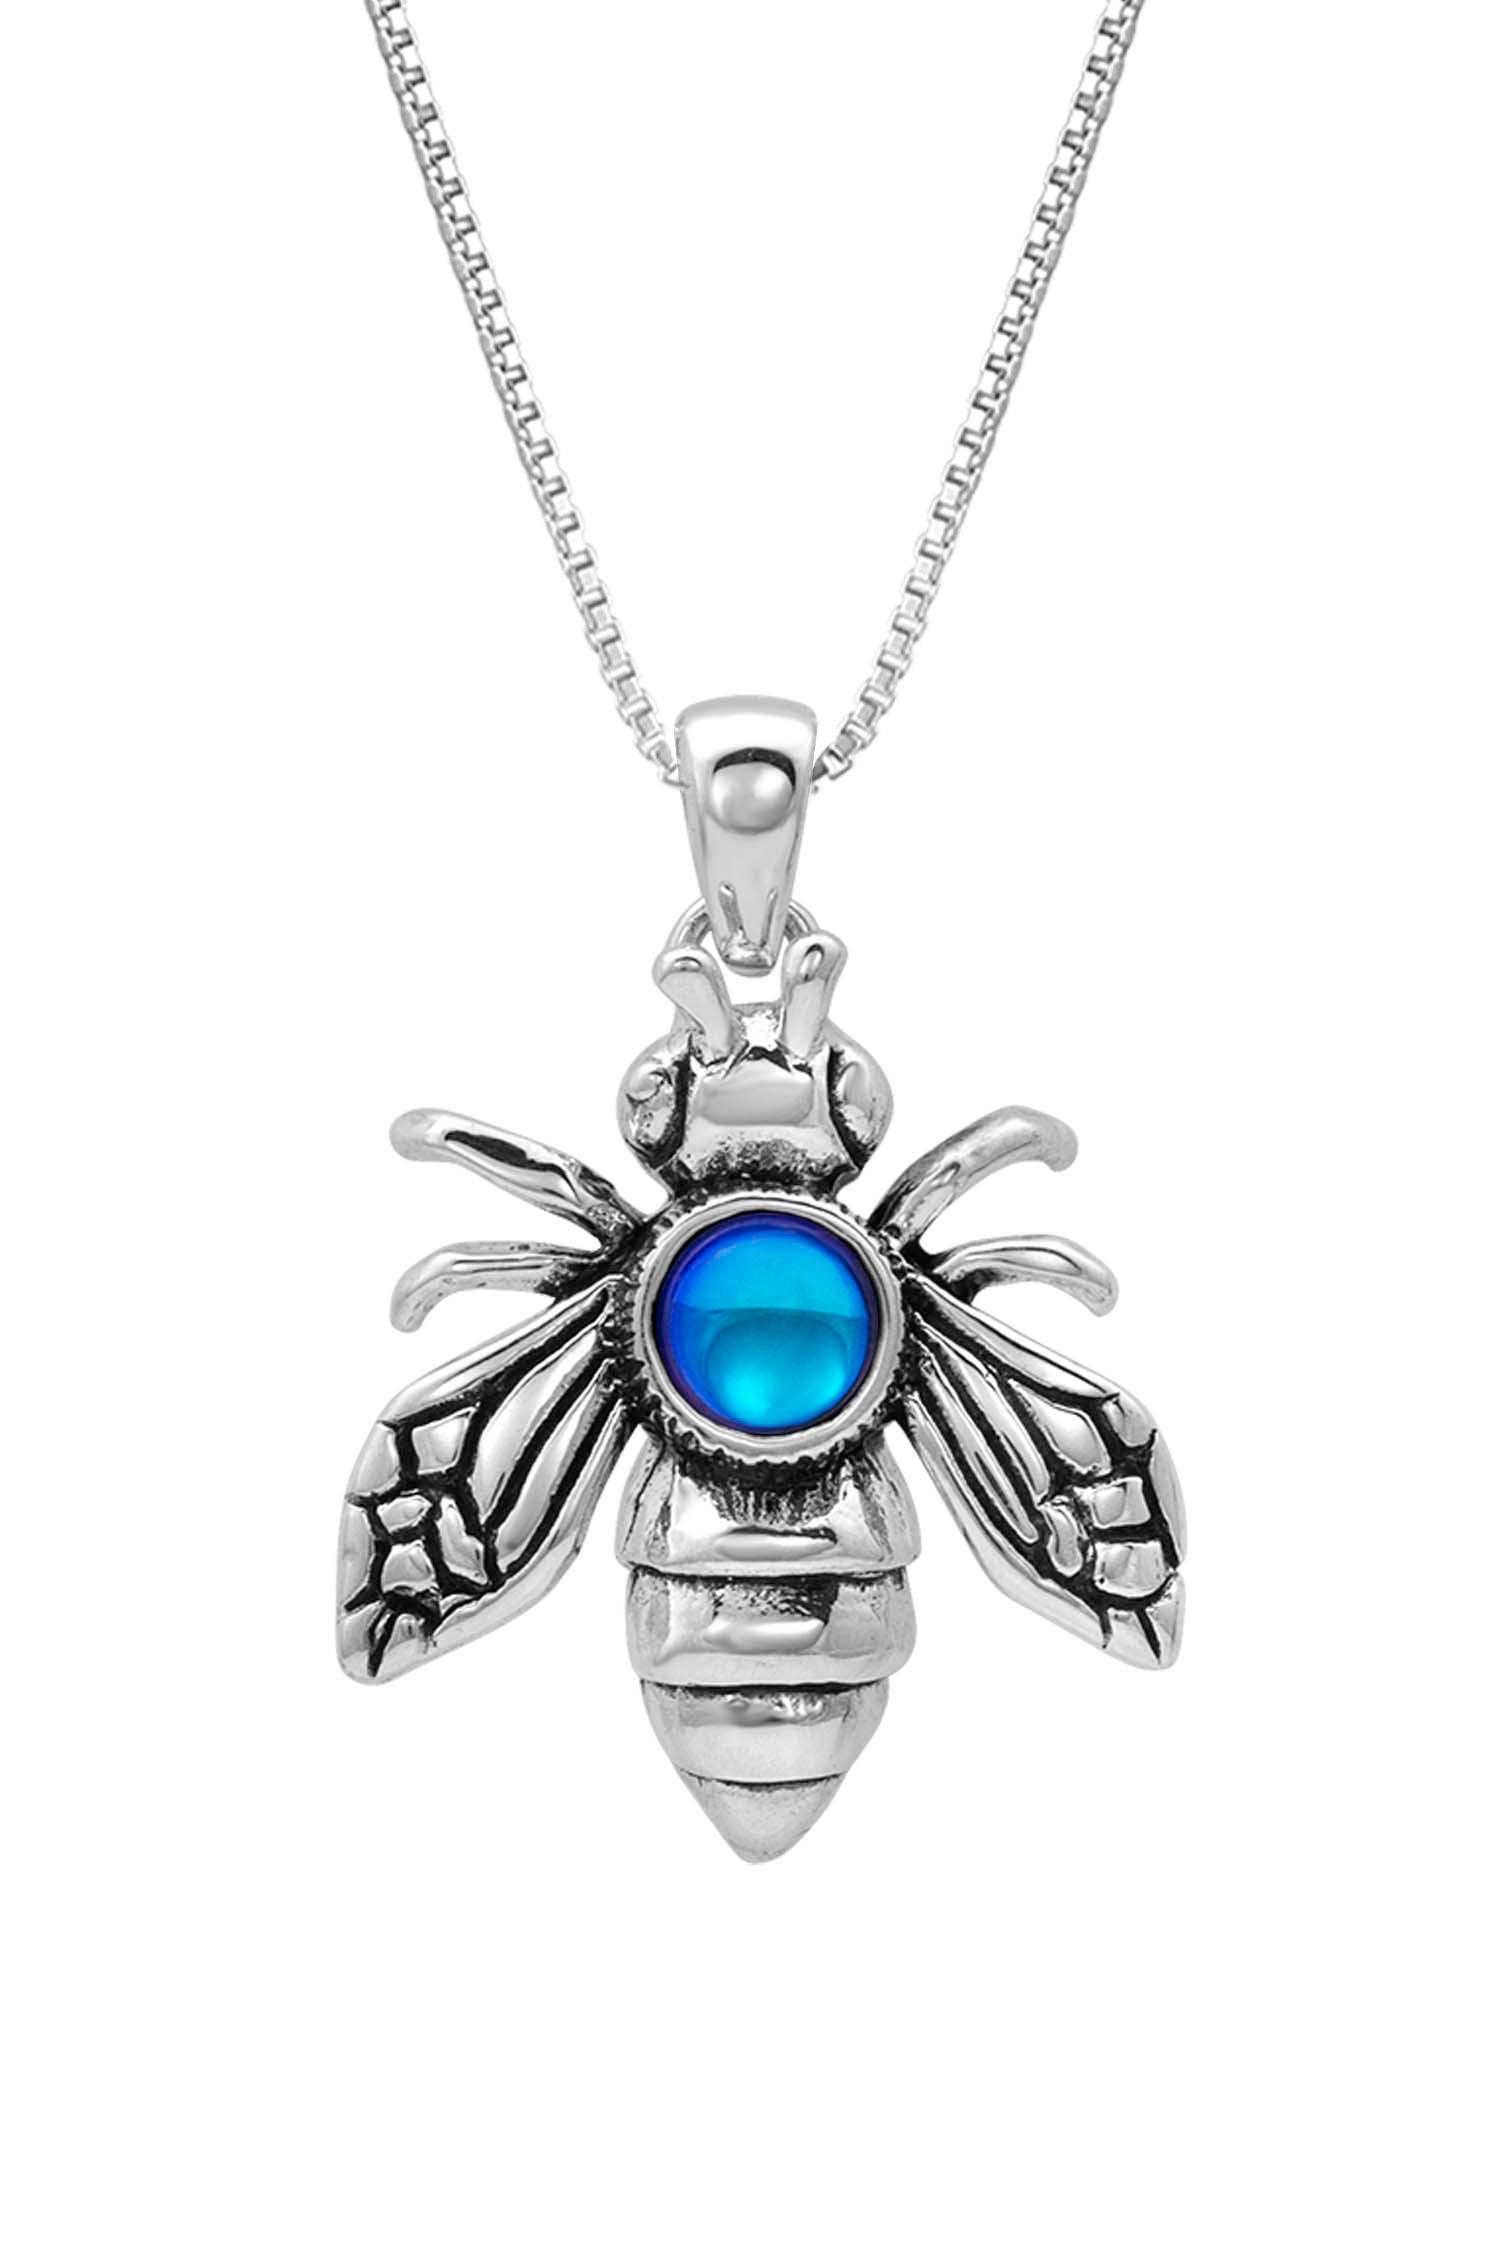 Amazon.com: Bee Necklace,Honey Necklace,Honey Bee Locket,Honey,Bumble Bee  Necklace,Ancient Silver Locket Necklace: Clothing, Shoes & Jewelry